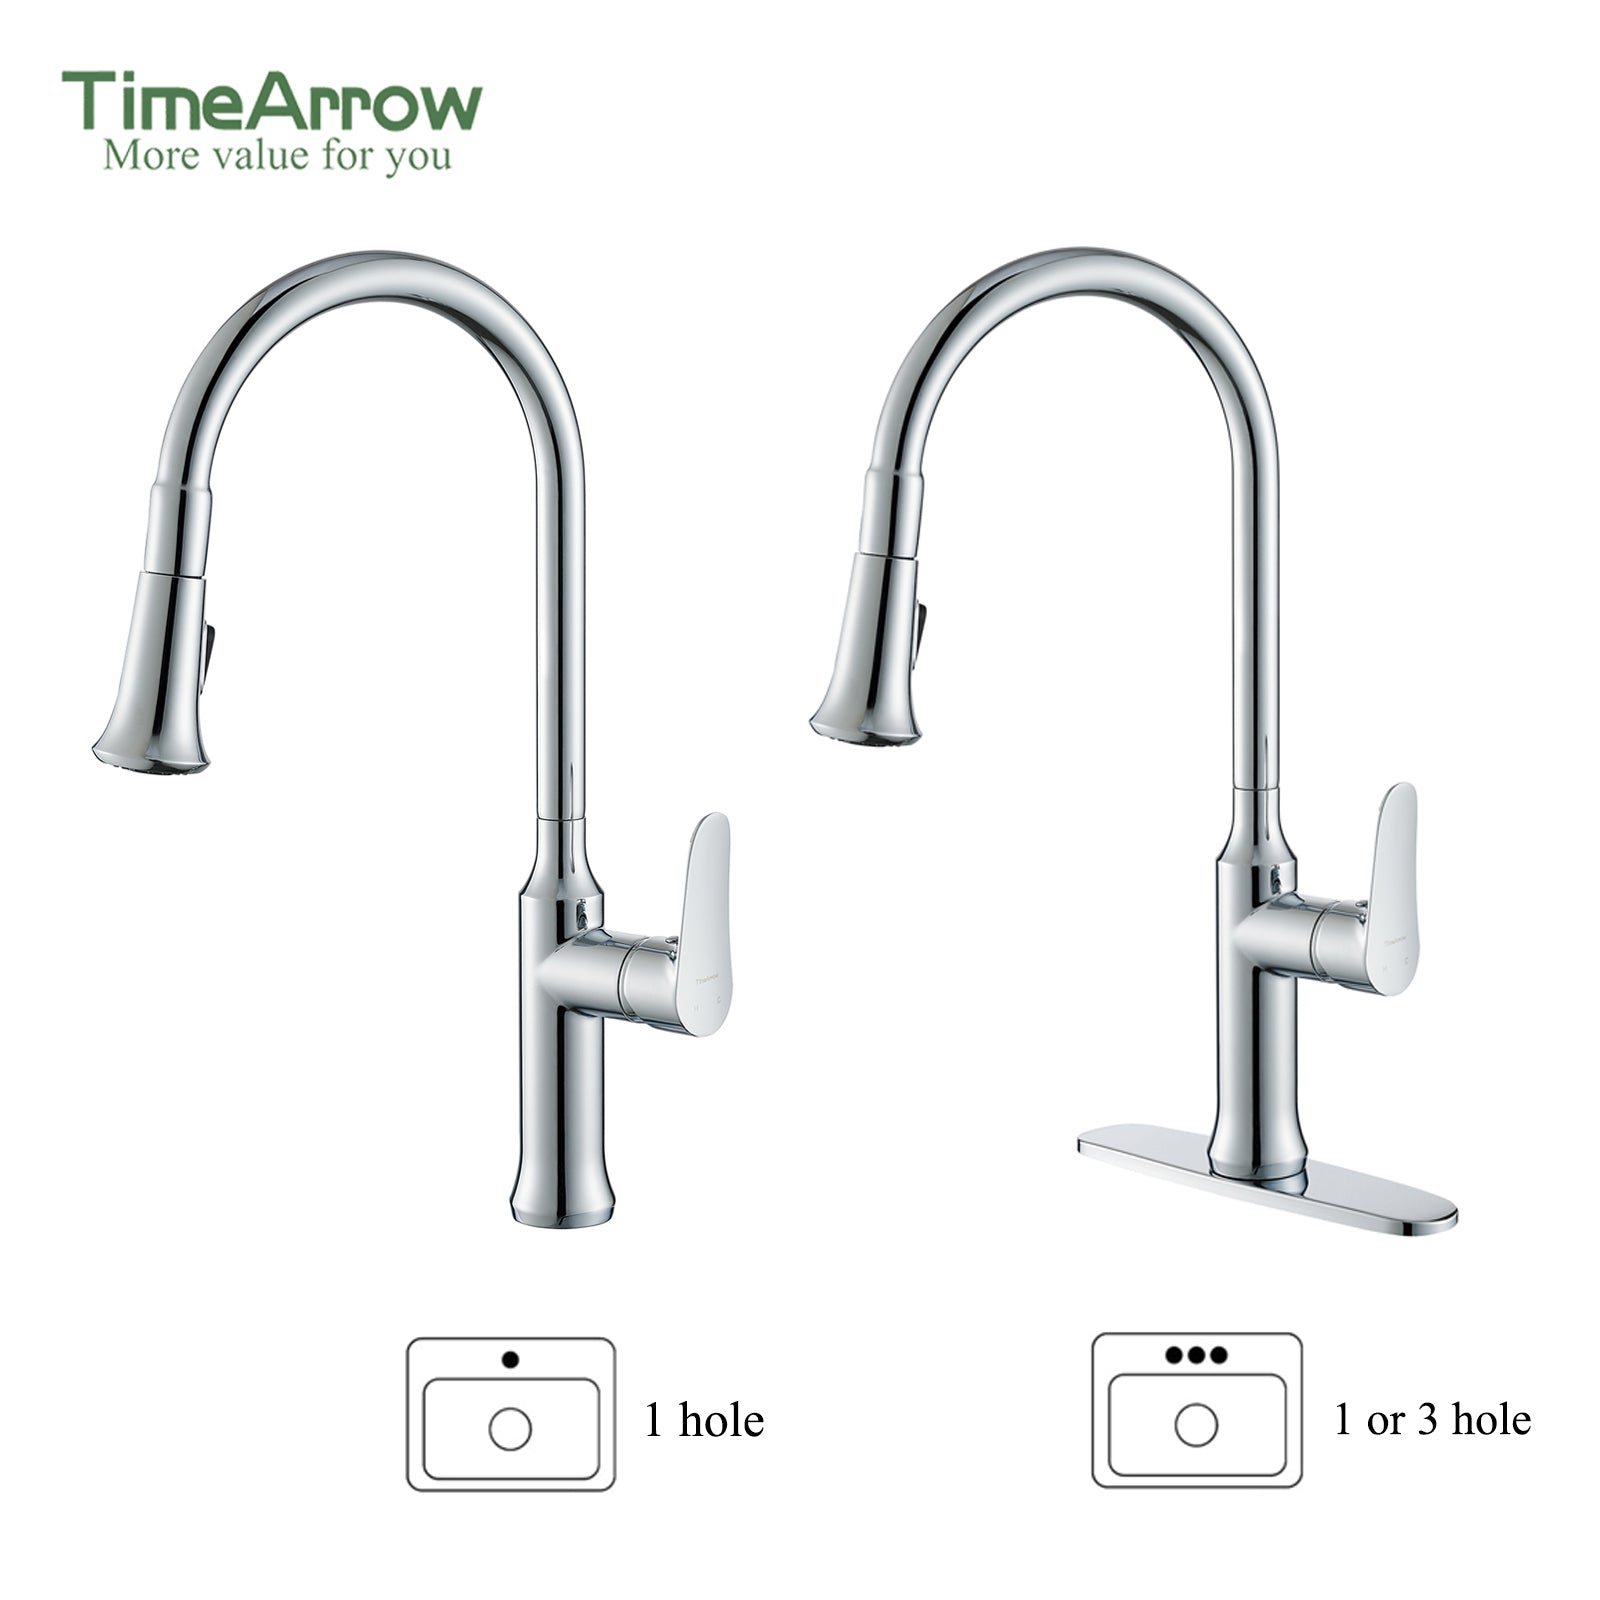 TimeArrow Chrome Single Handle Kitchen Faucet with Pull Down Sprayer